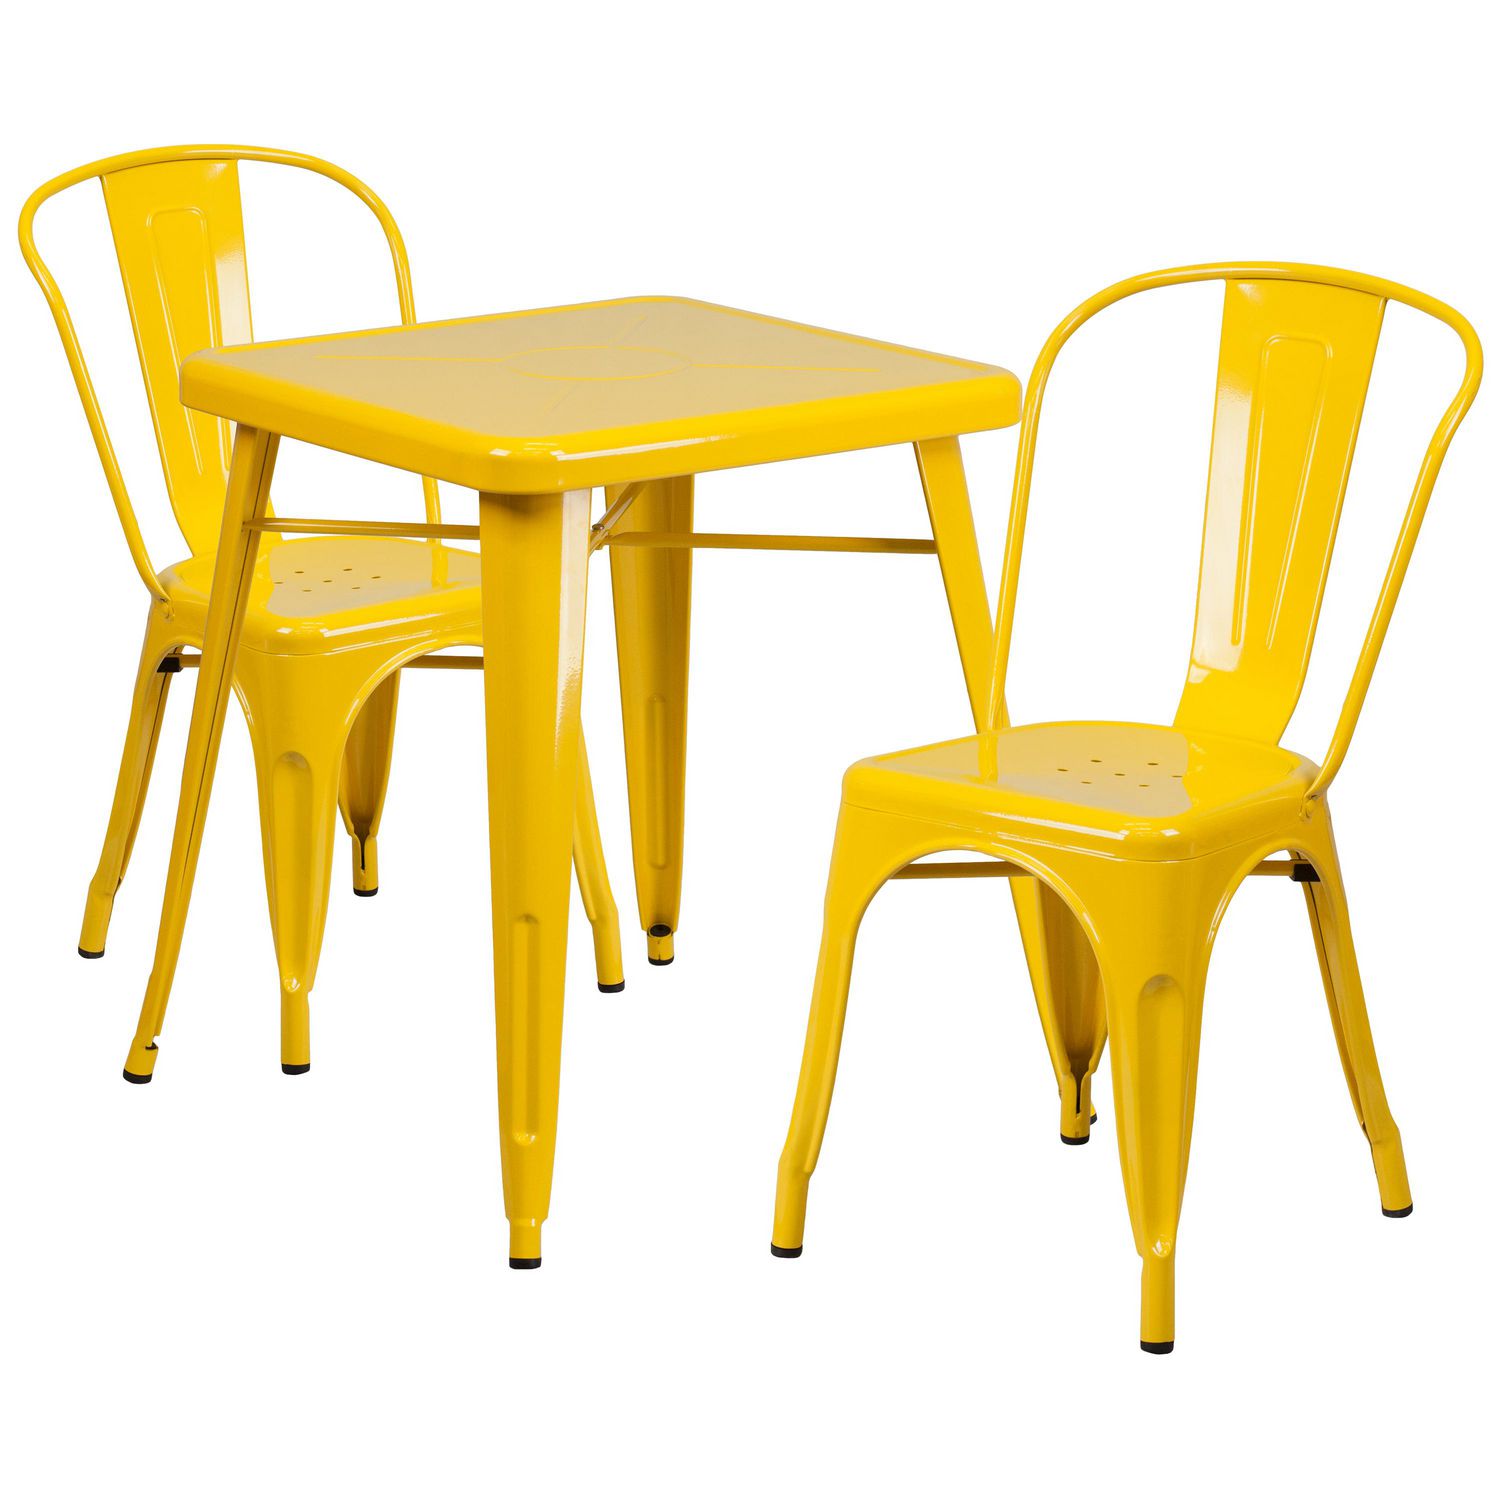 2375 Square Yellow Metal Indoor Outdoor Table Set With 2 Stack